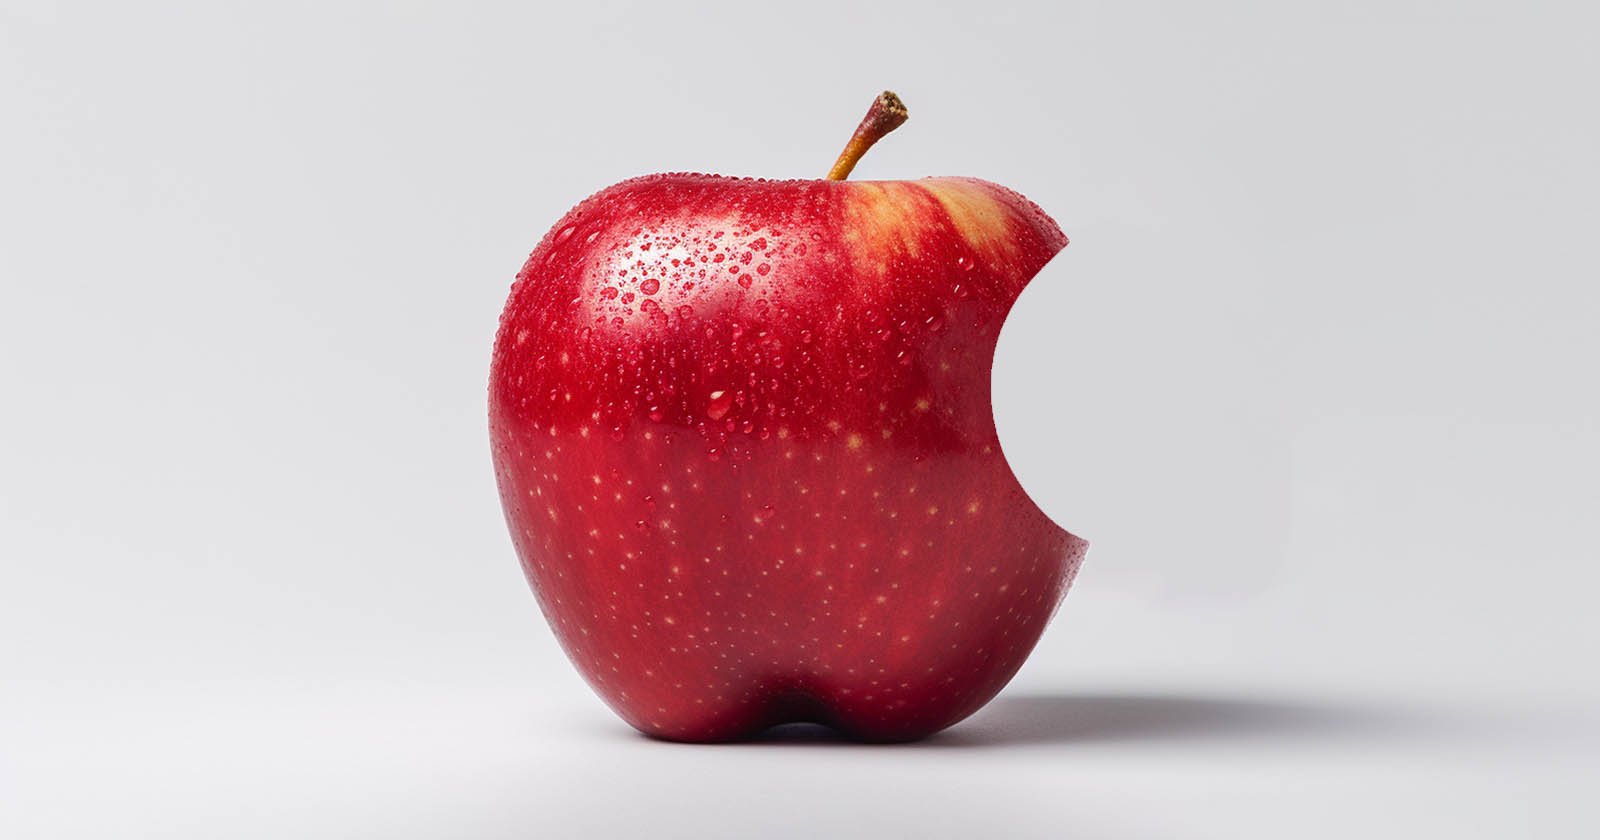 Apple Wants to Own Rights to Images of Real Apples